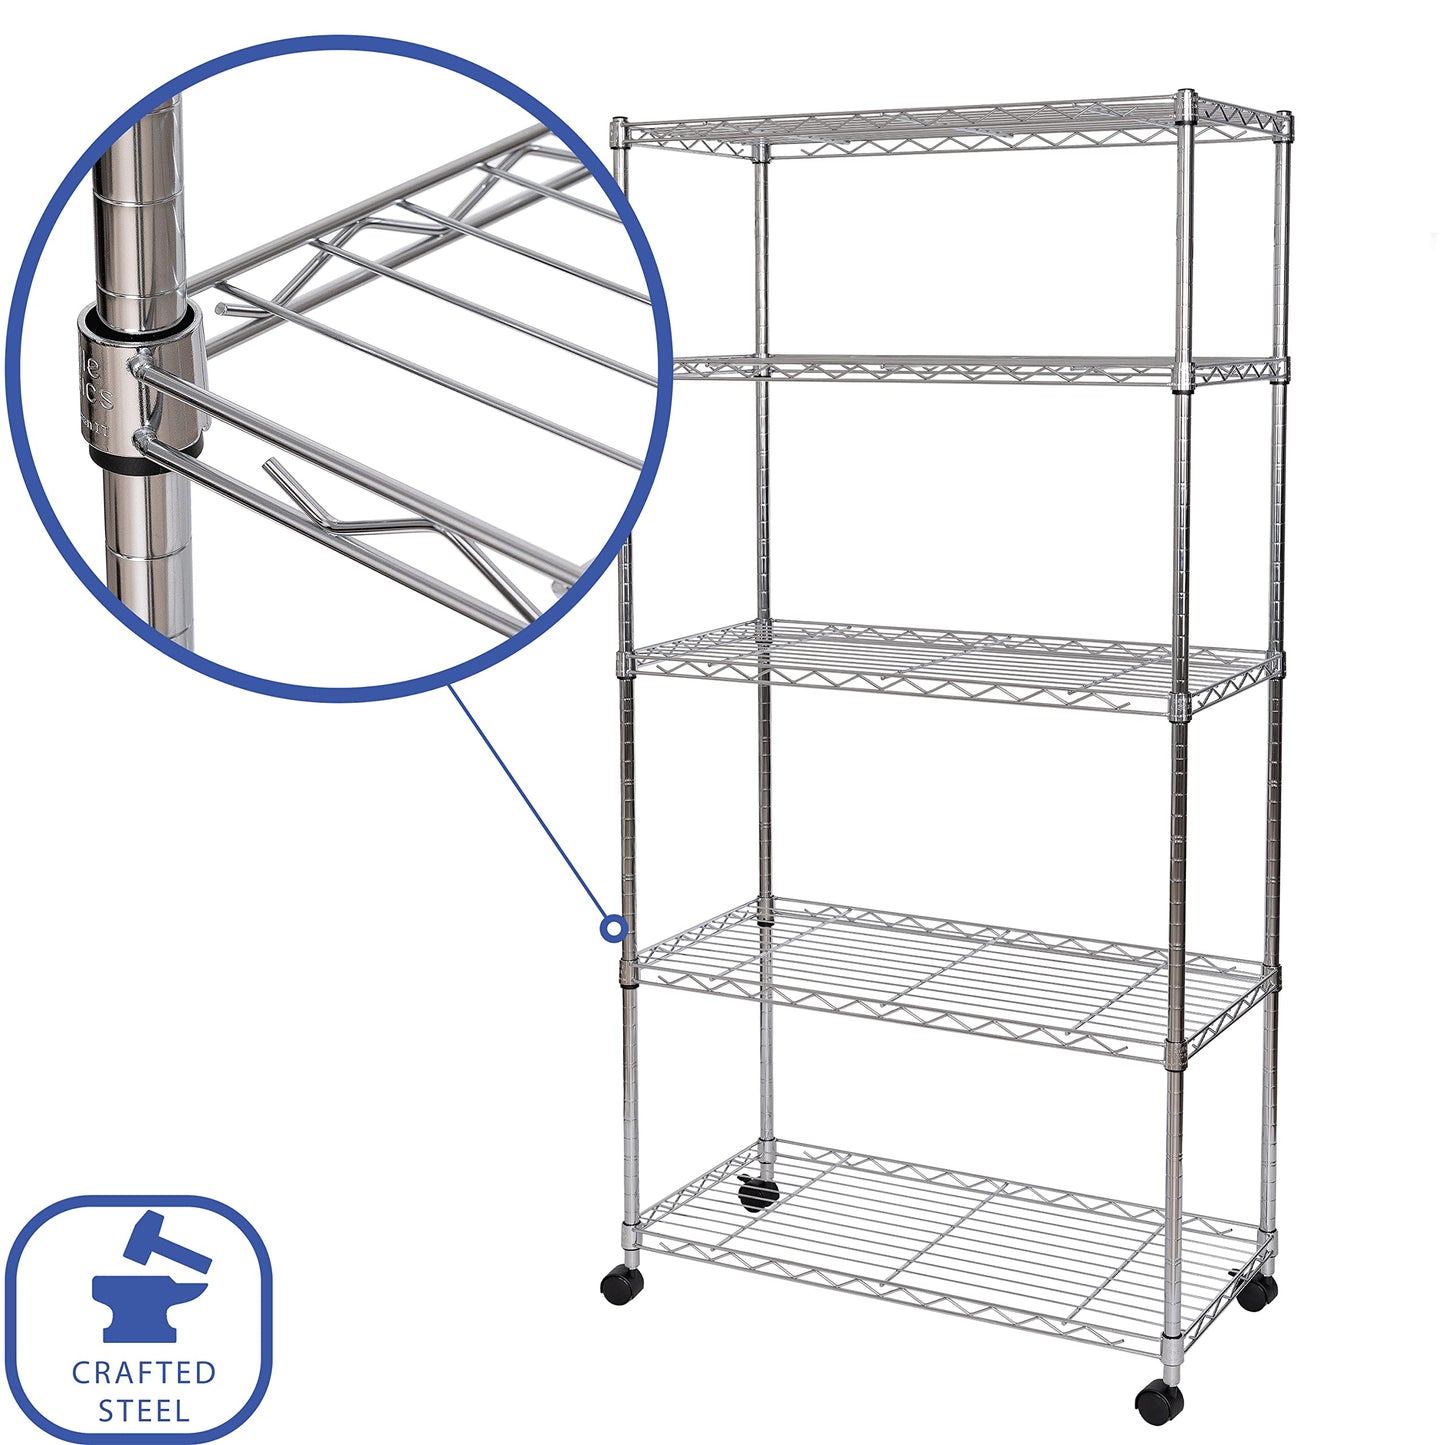 Seville Classics 5-Tier Wire Shelving with Wheels, 5-Tier, 30"" W x 14"" D (NEW MODEL), Chrome Plating, Plated Steel